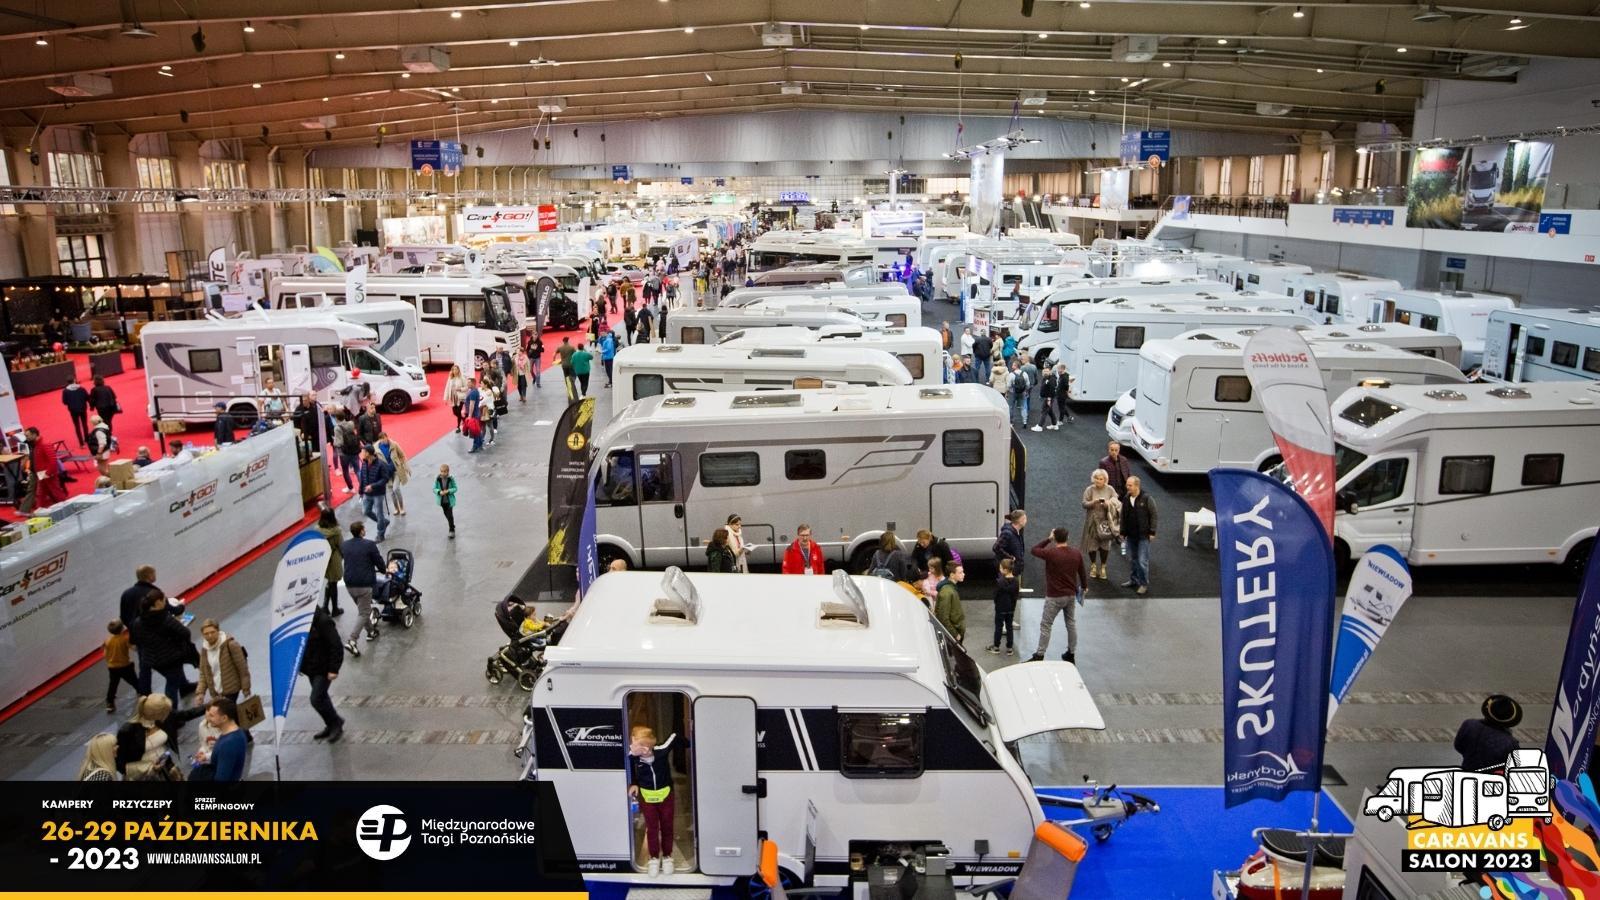 The largest Polish caravanning fair on October 26-29, 2023 in Poznań – image 3